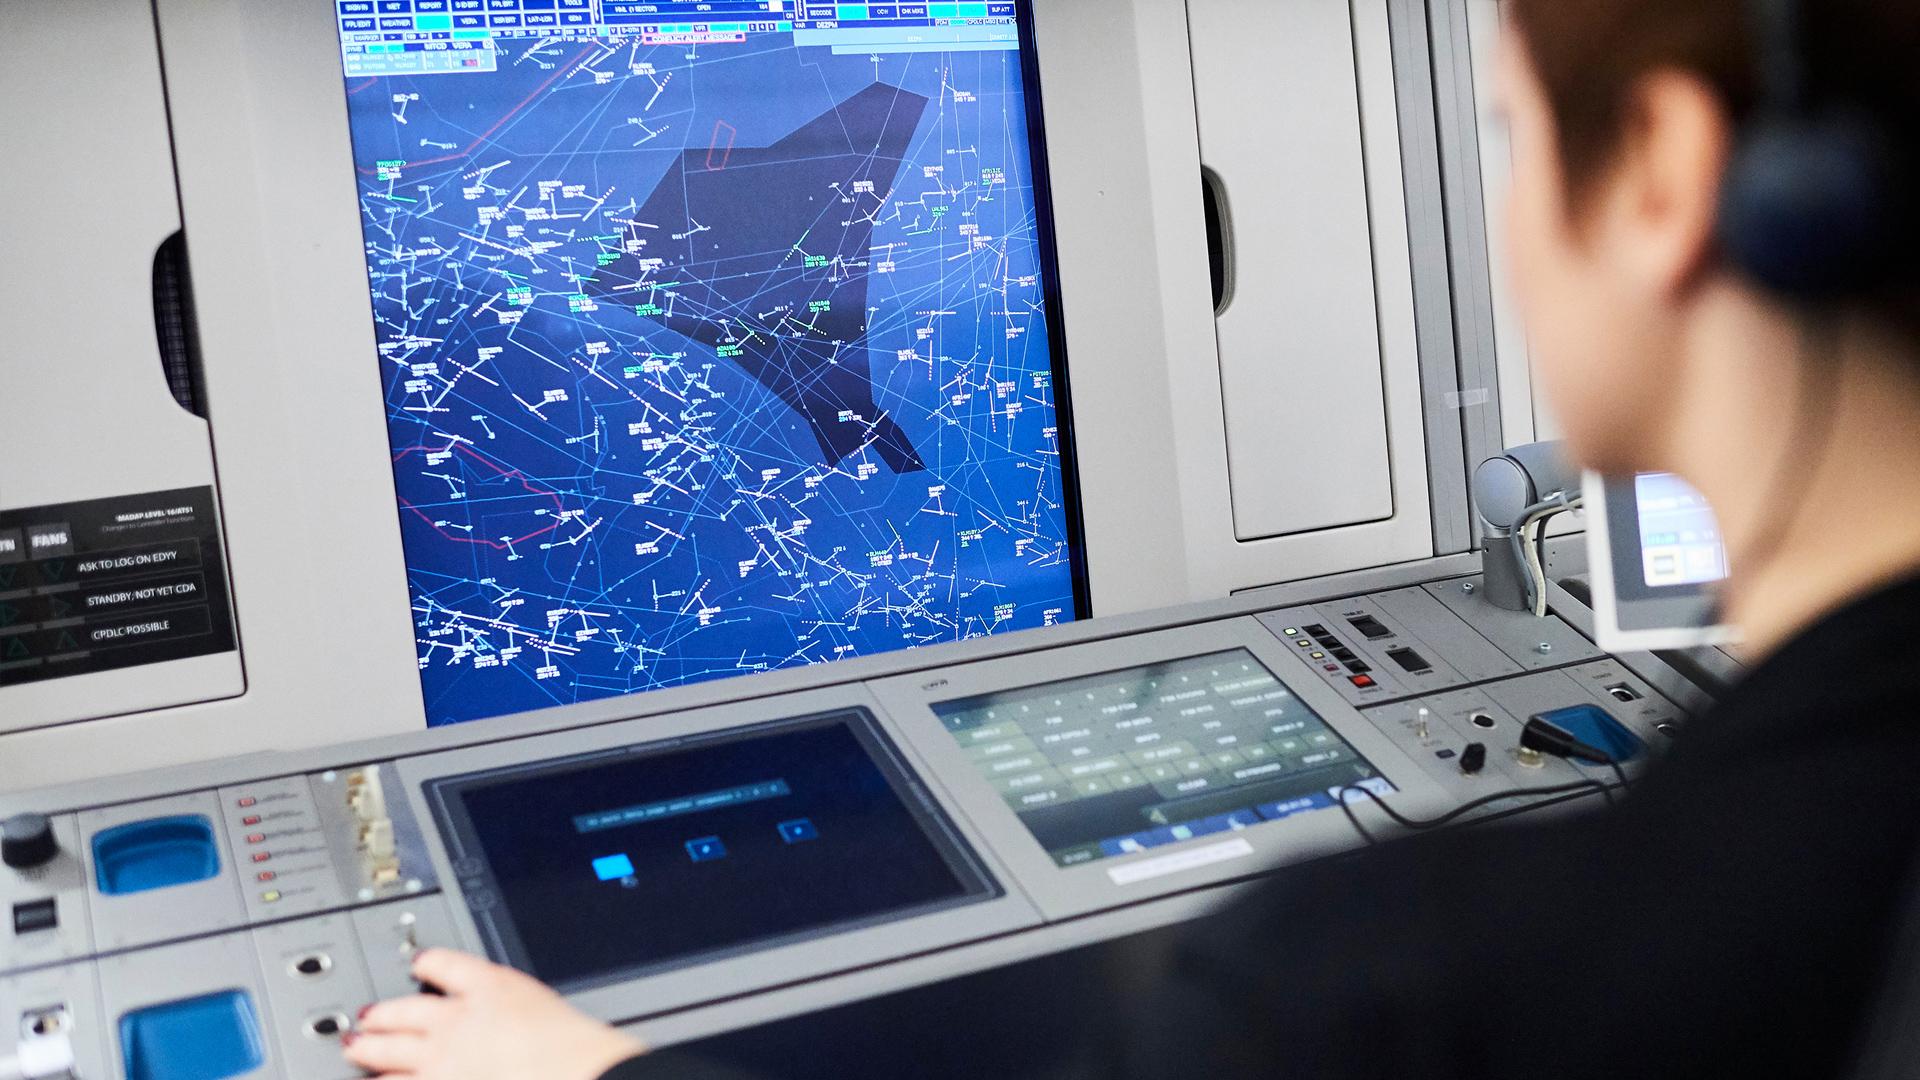 Eurocontrol´s Upper Area Control Centre needs an Information Security Risk Assessment